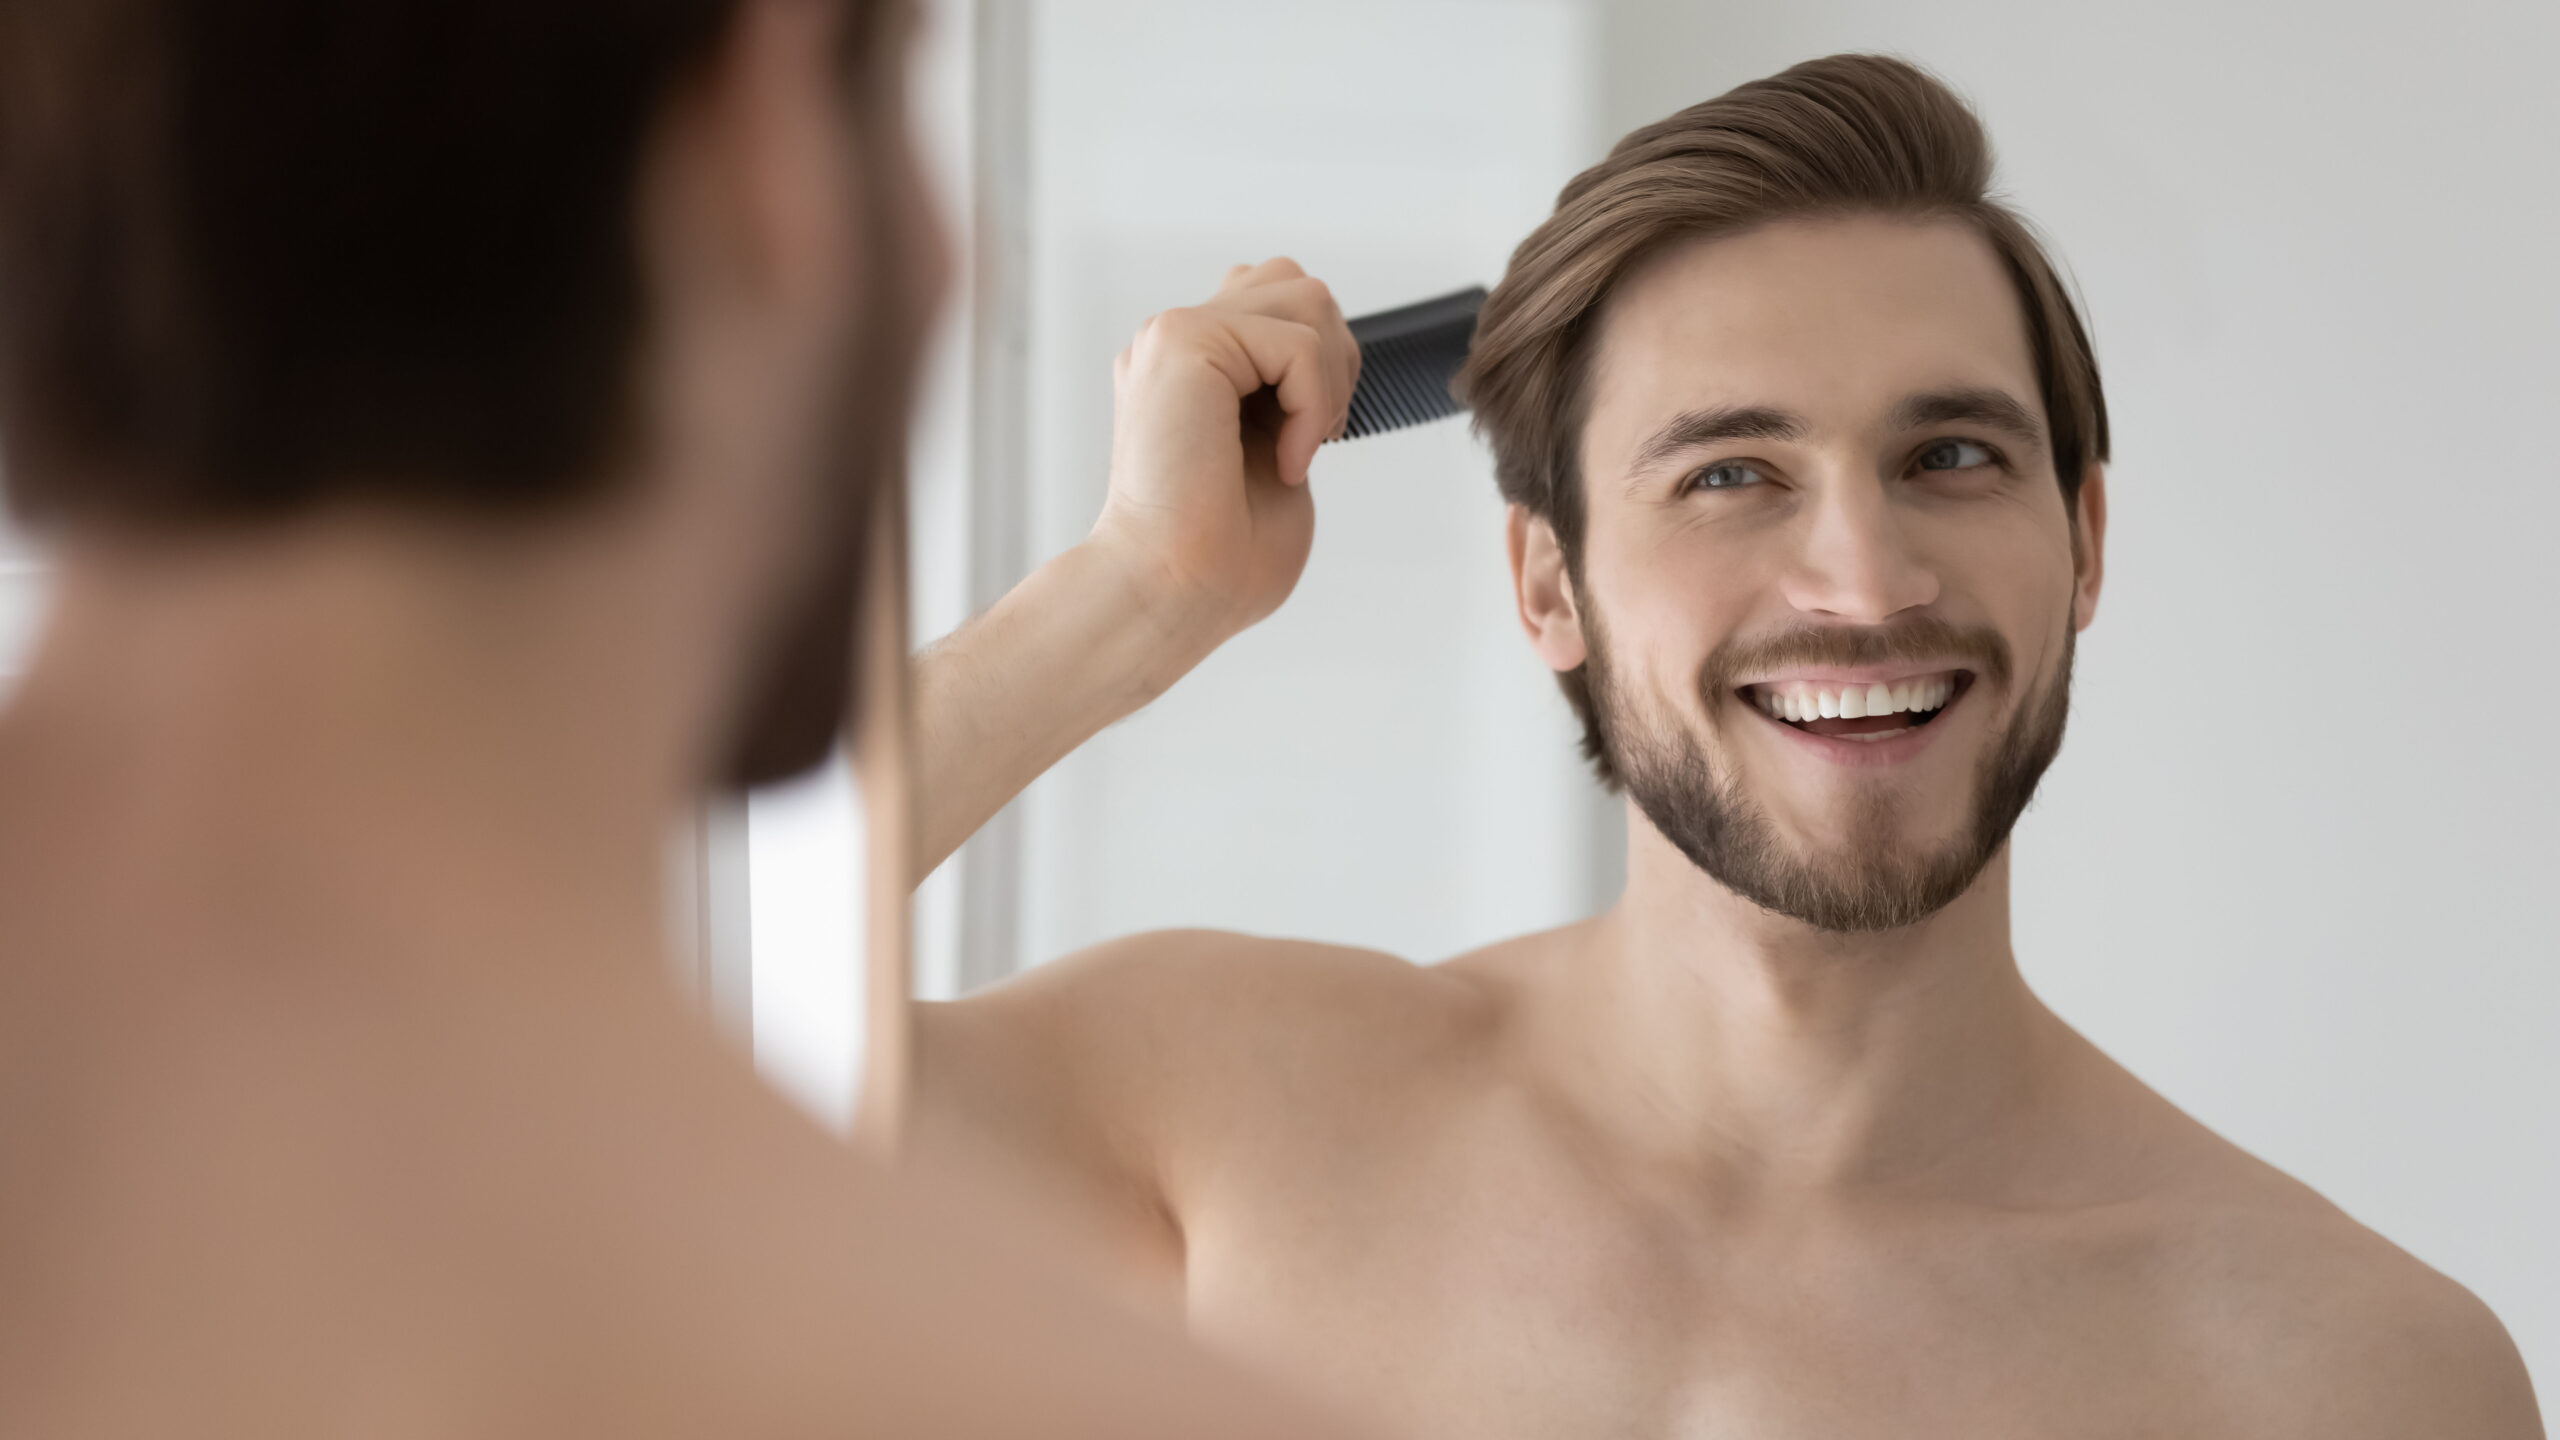 Hair Loss Treatment For Men Uk Products That Actually Work Mbman